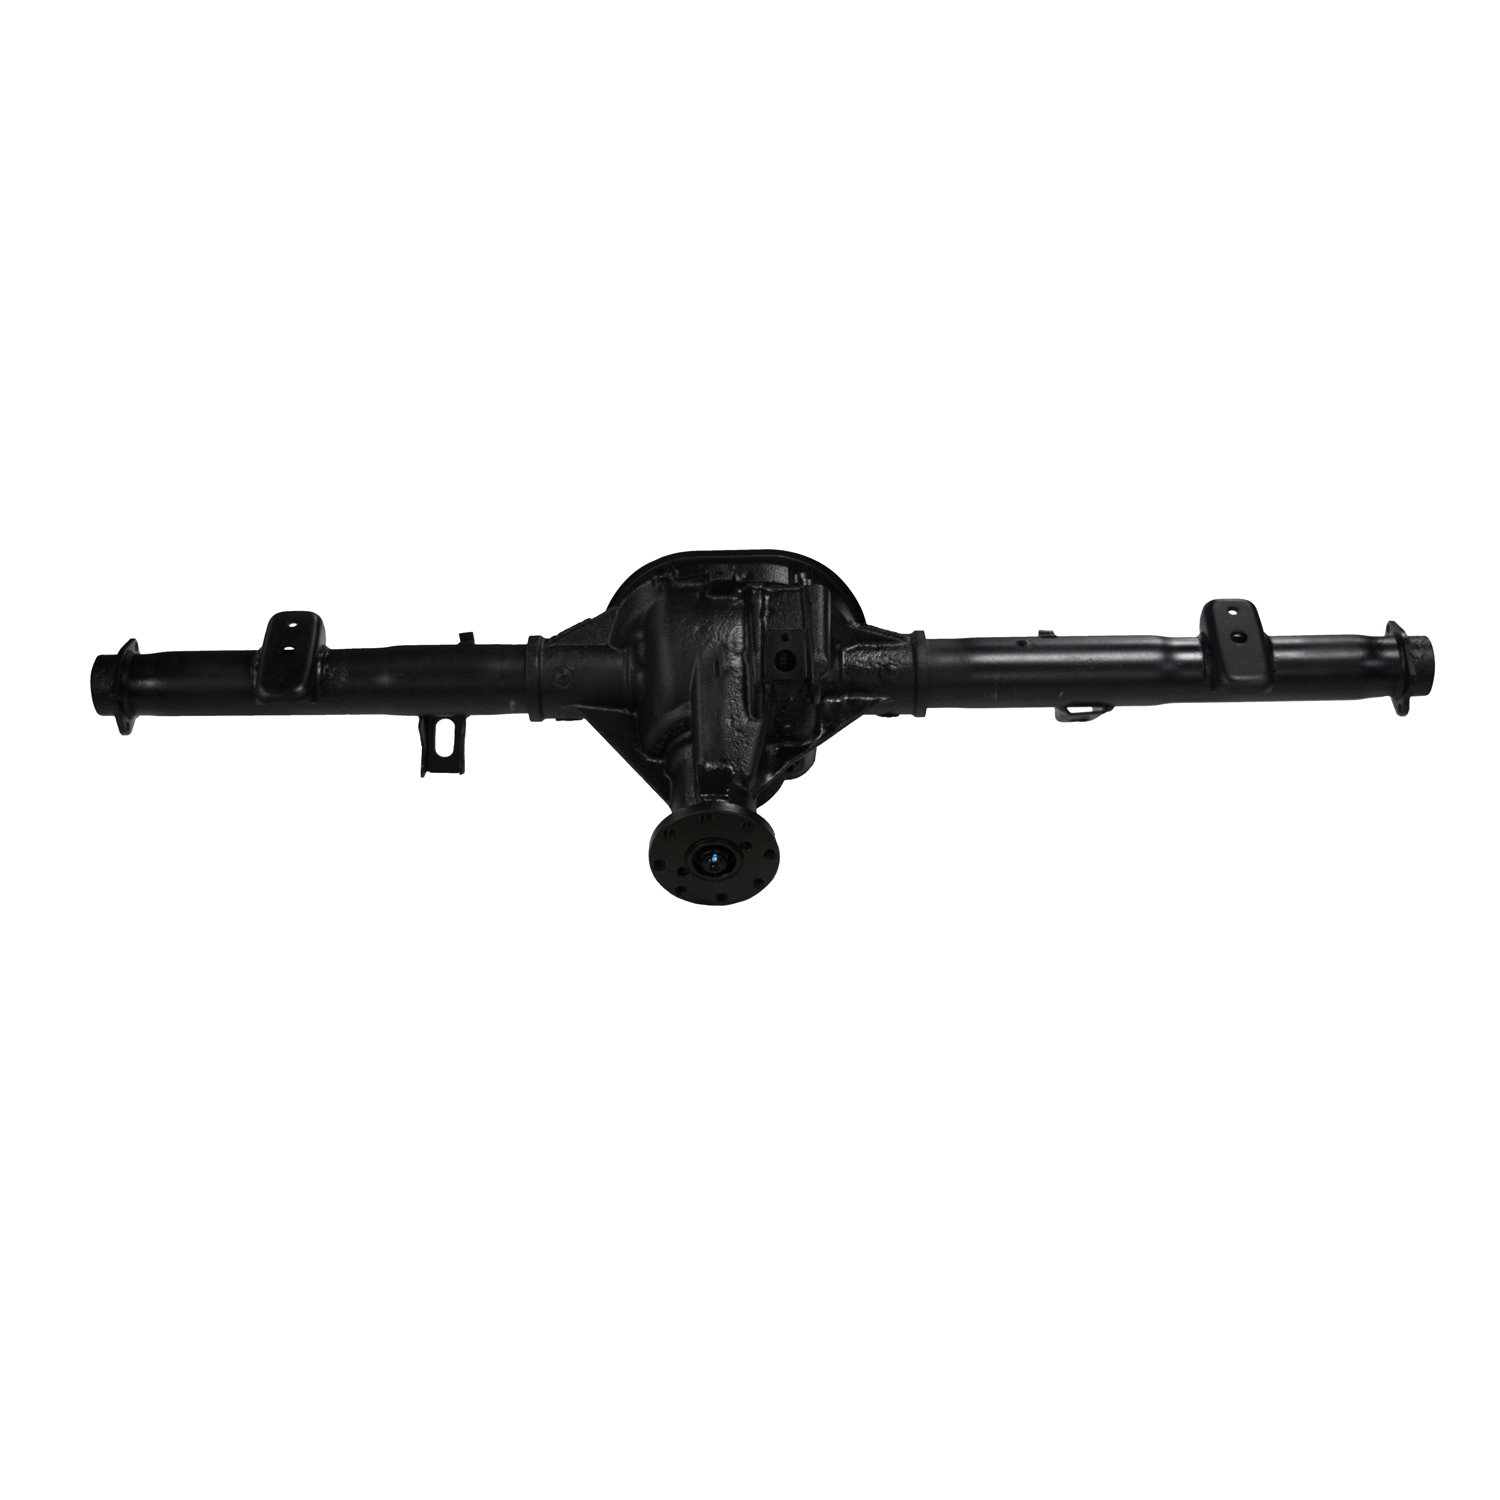 Remanufactured Complete Axle Assembly for Ford 7.5" 94-97 Ford Ranger 3.45, 10" Brakes